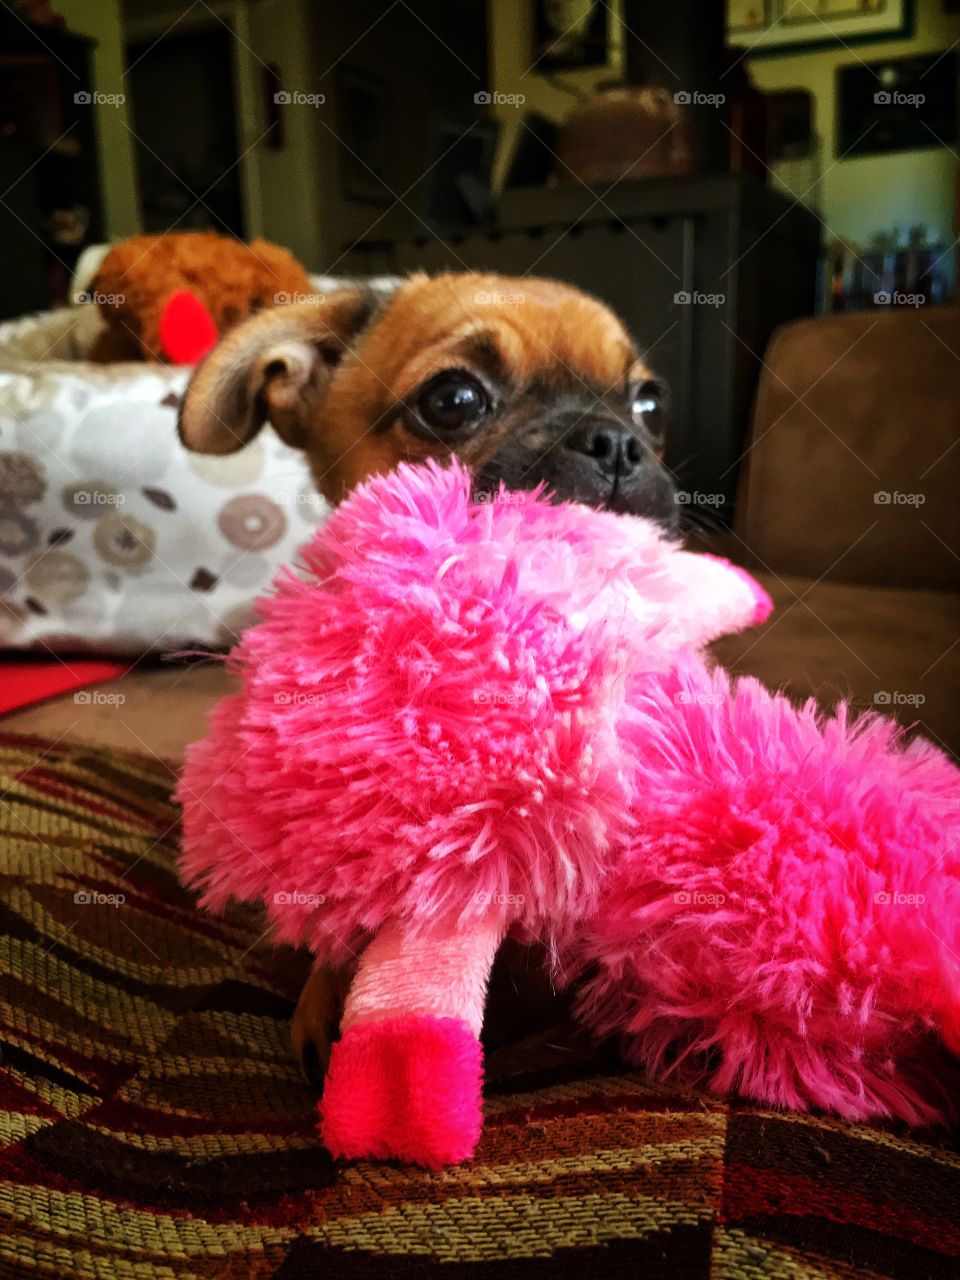 This is chi chi and her toy